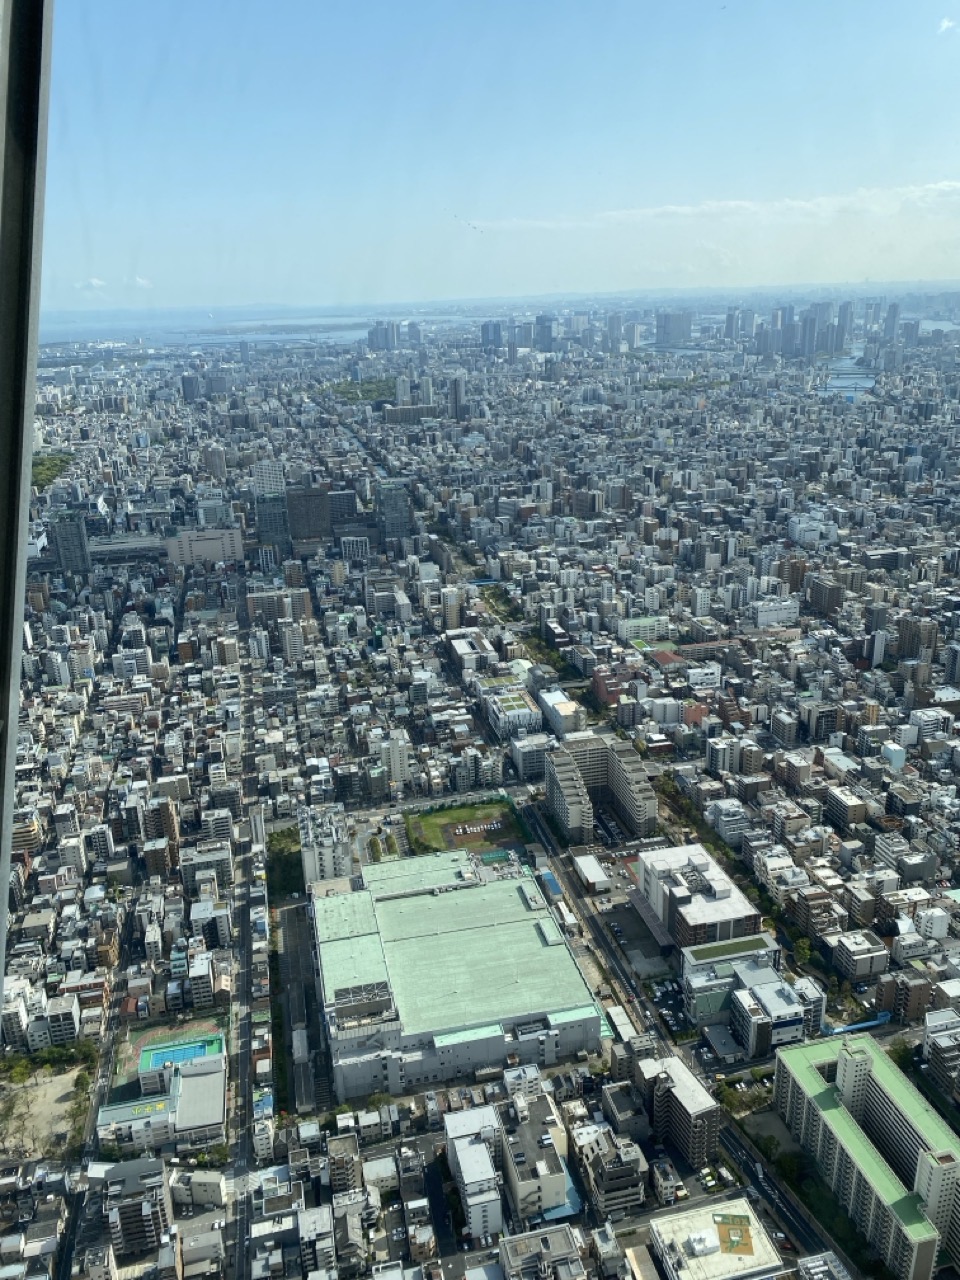 Another view of Tokyo from the sky tree